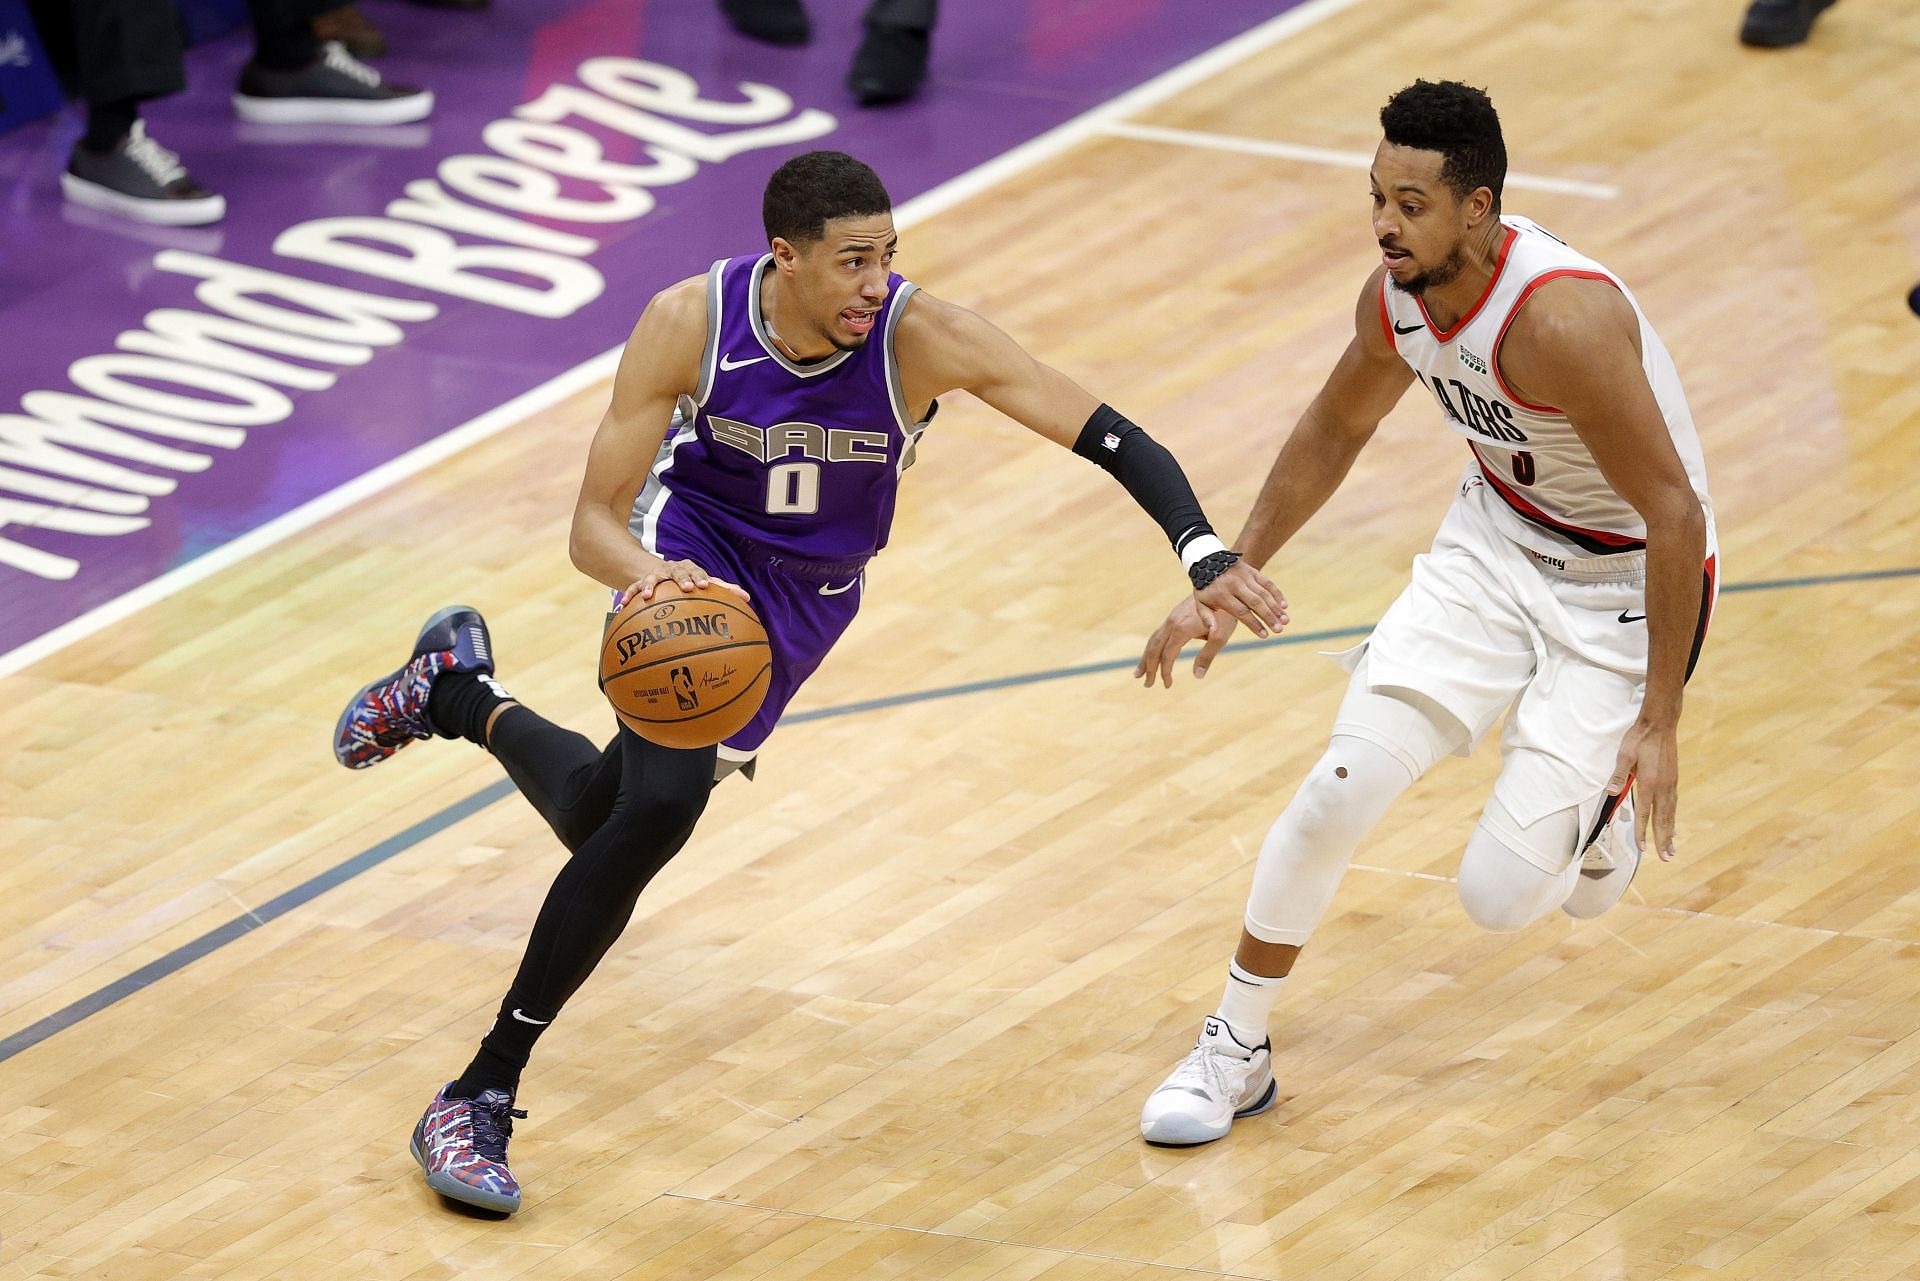 The Sacramento Kings face off against the Portland Trail Blazers in the season opener.